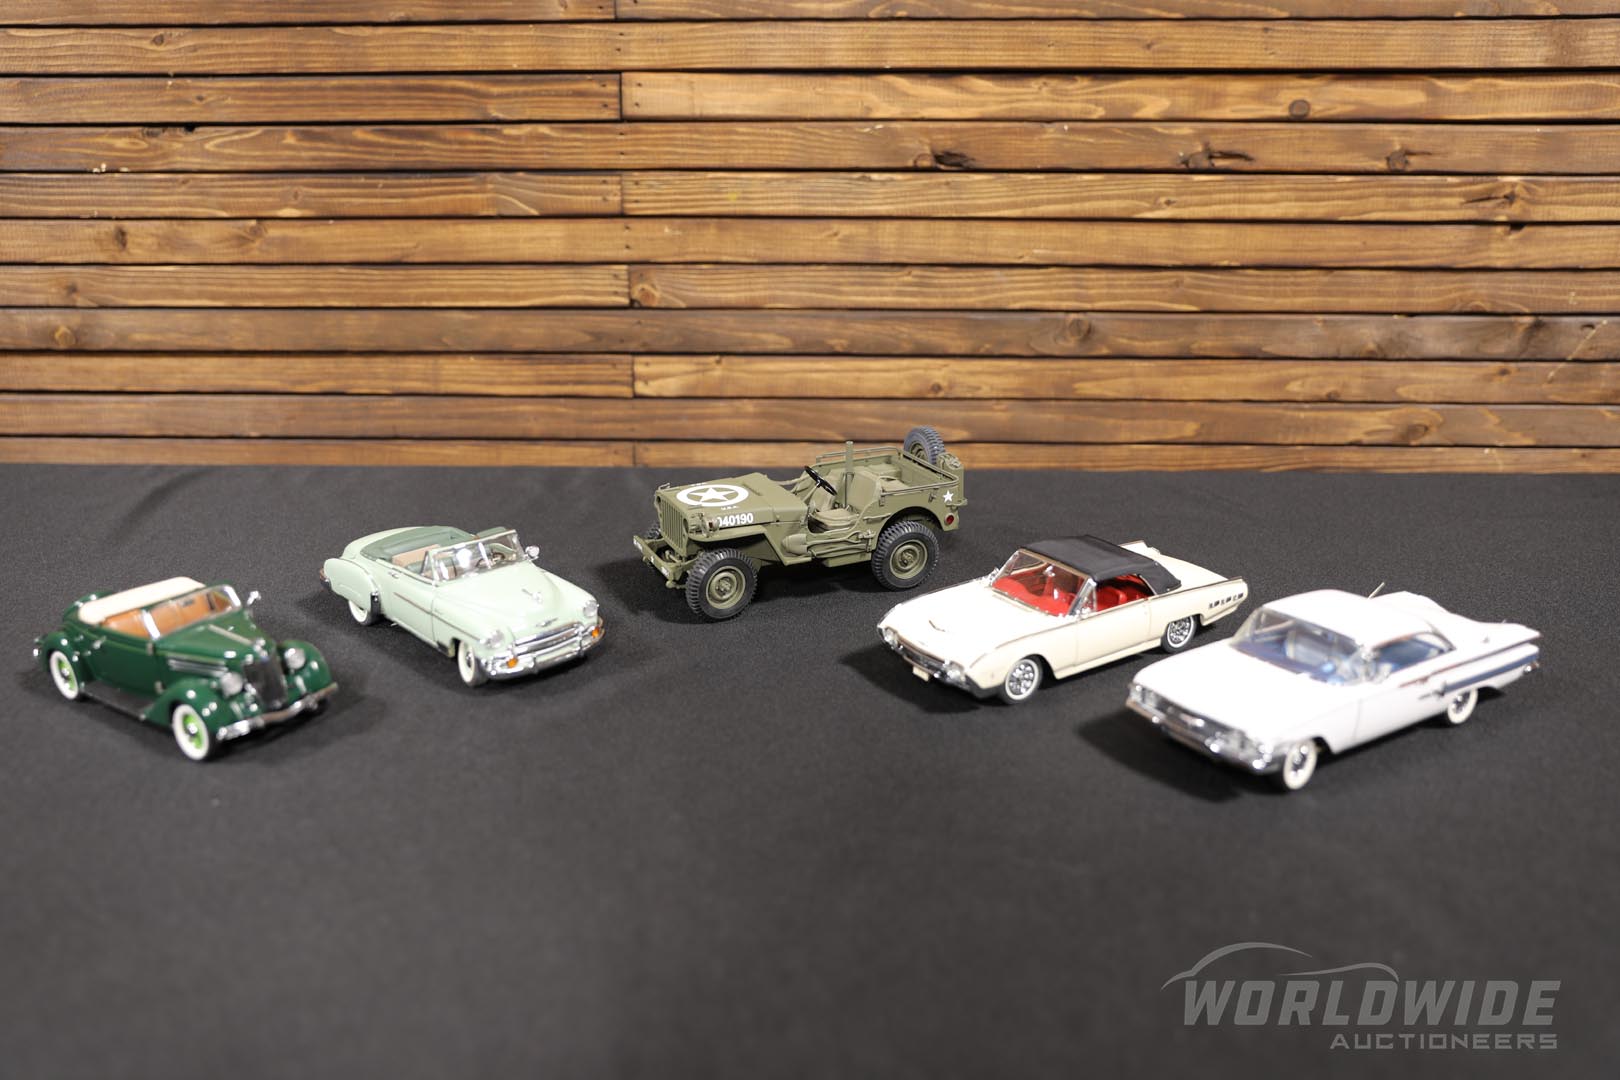  Collection of Five Quality Die -Cast Automobile Models from Franklin Mi nt and Danbury Mint